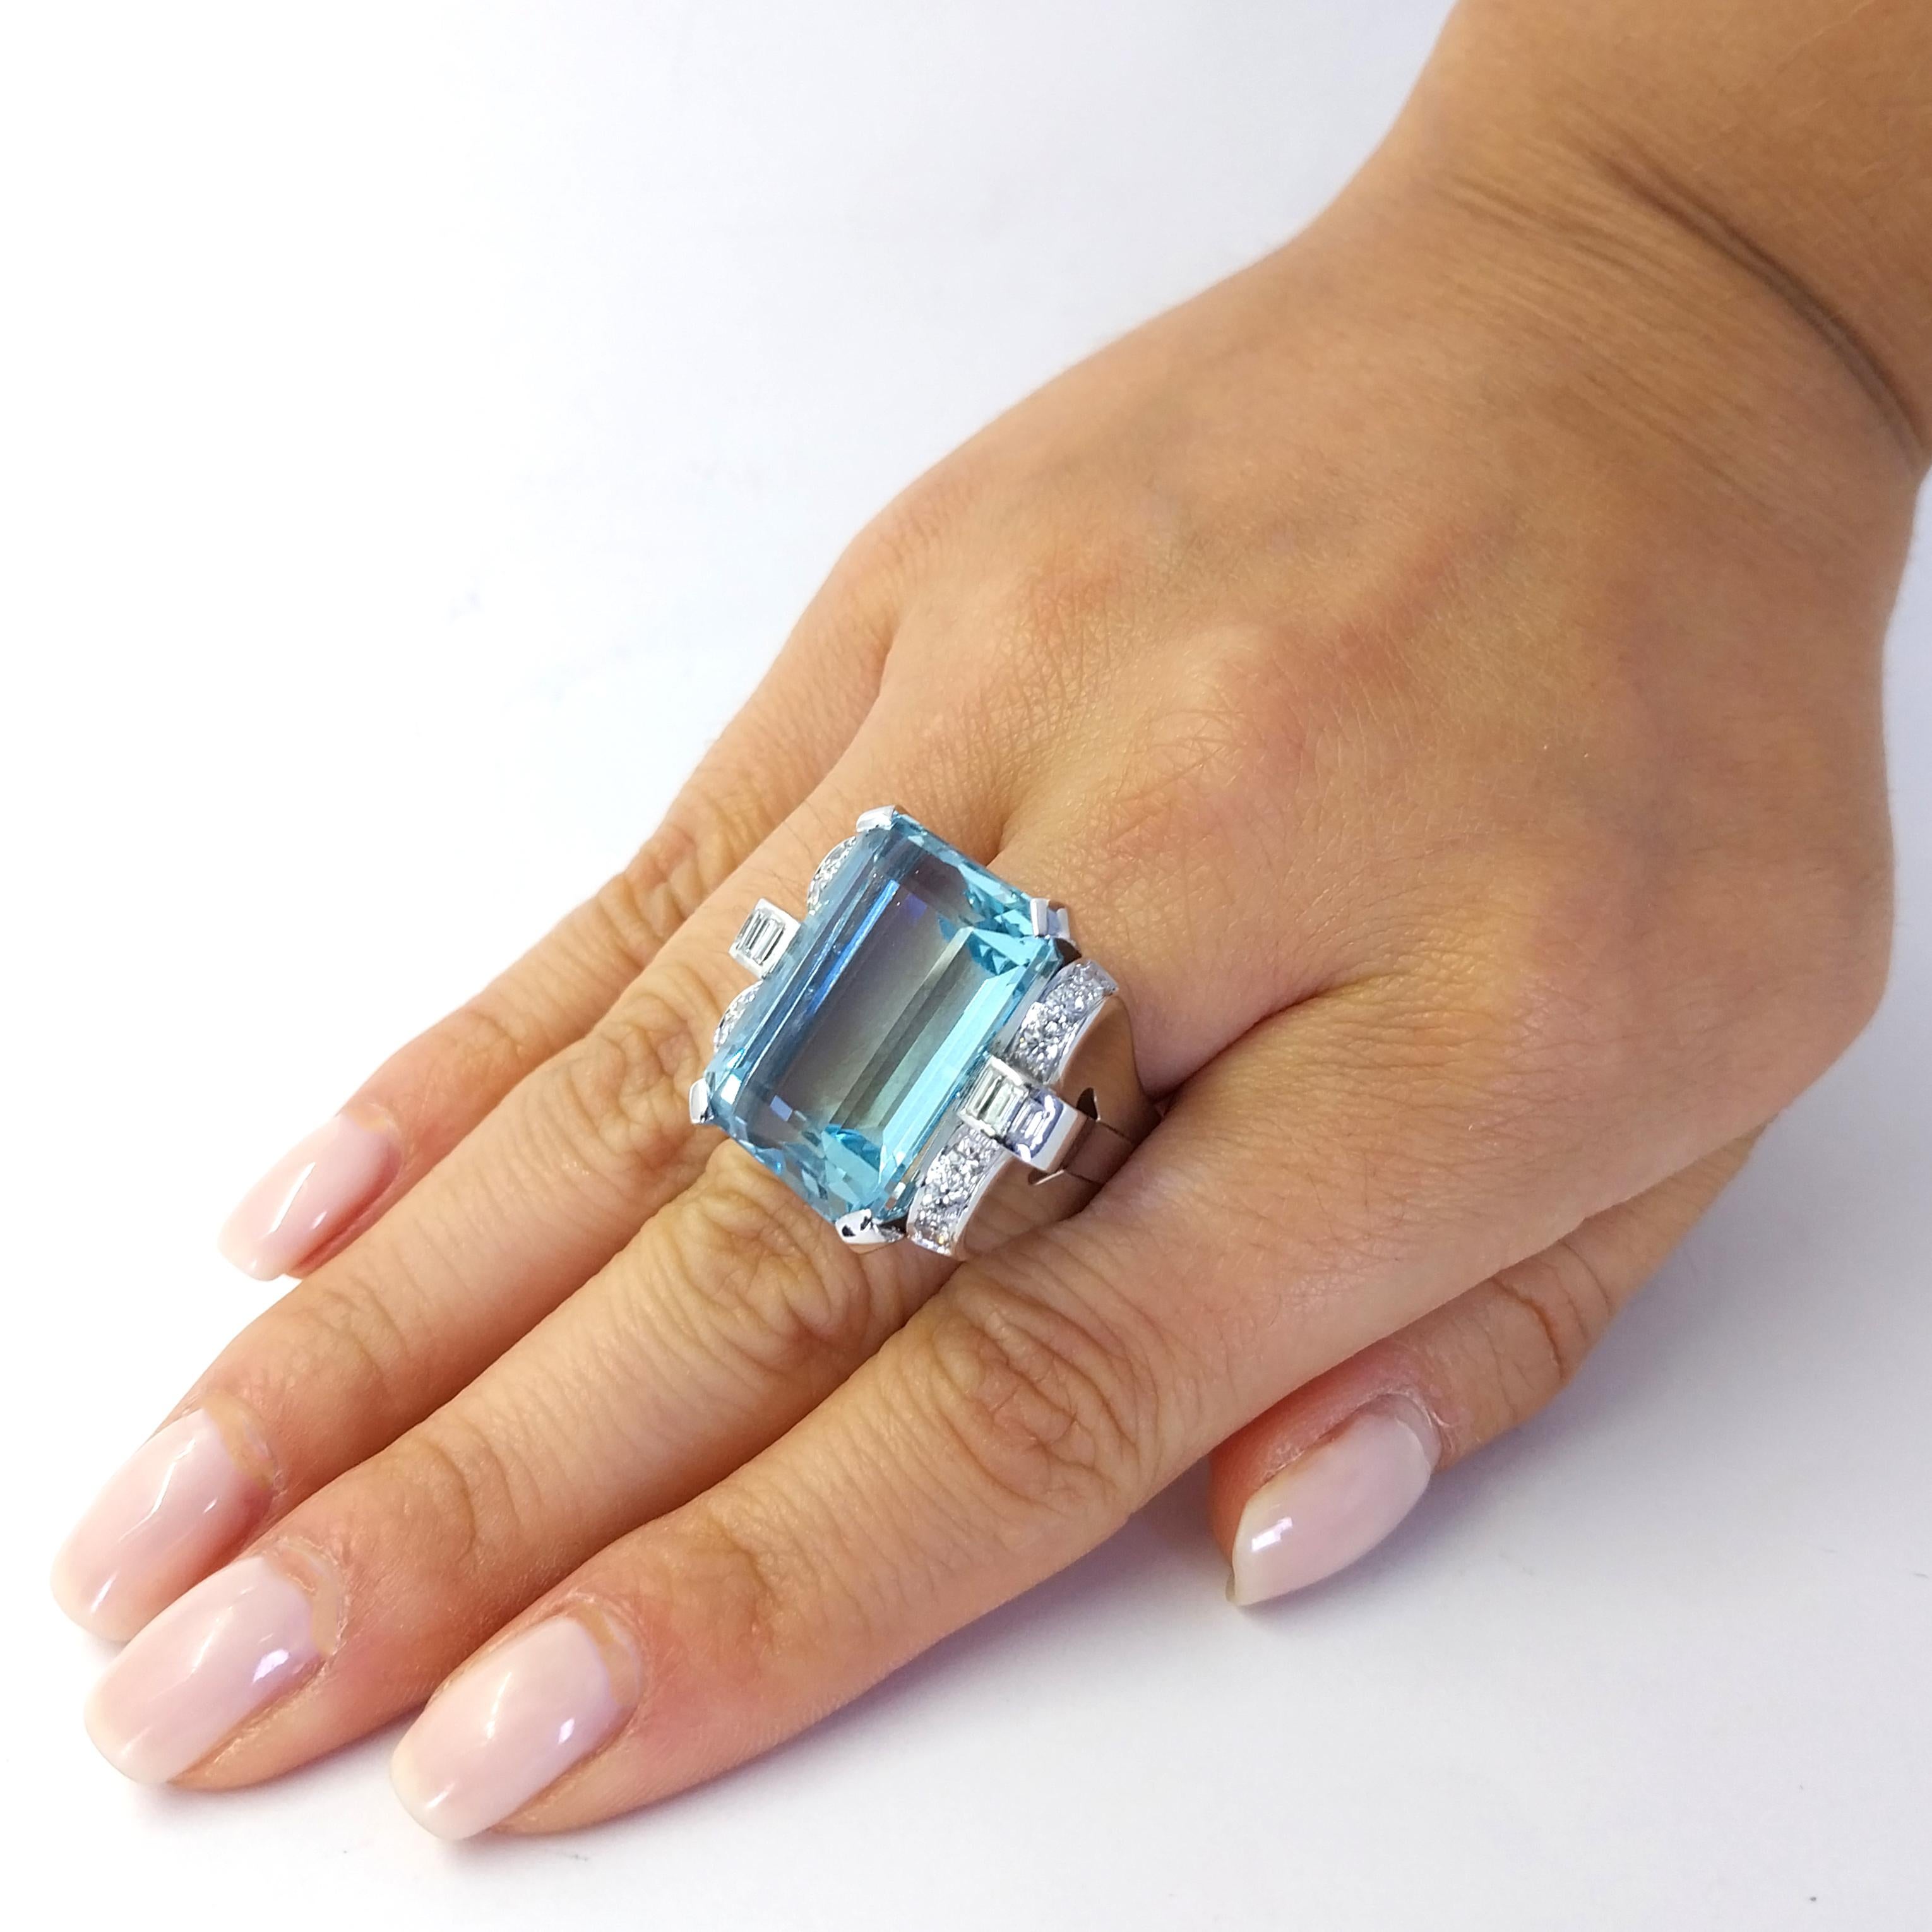 Enormous 18 Karat White Gold Retro Ring Featuring A 29.39 Carat Emerald Cut Aquamarine Accented by 18 Round and Baguette Cut Diamonds of VS Clarity and G Color Totaling 0.66 Carats. Finger Size 7.25. Purchase Includes One Sizing Service Prior to